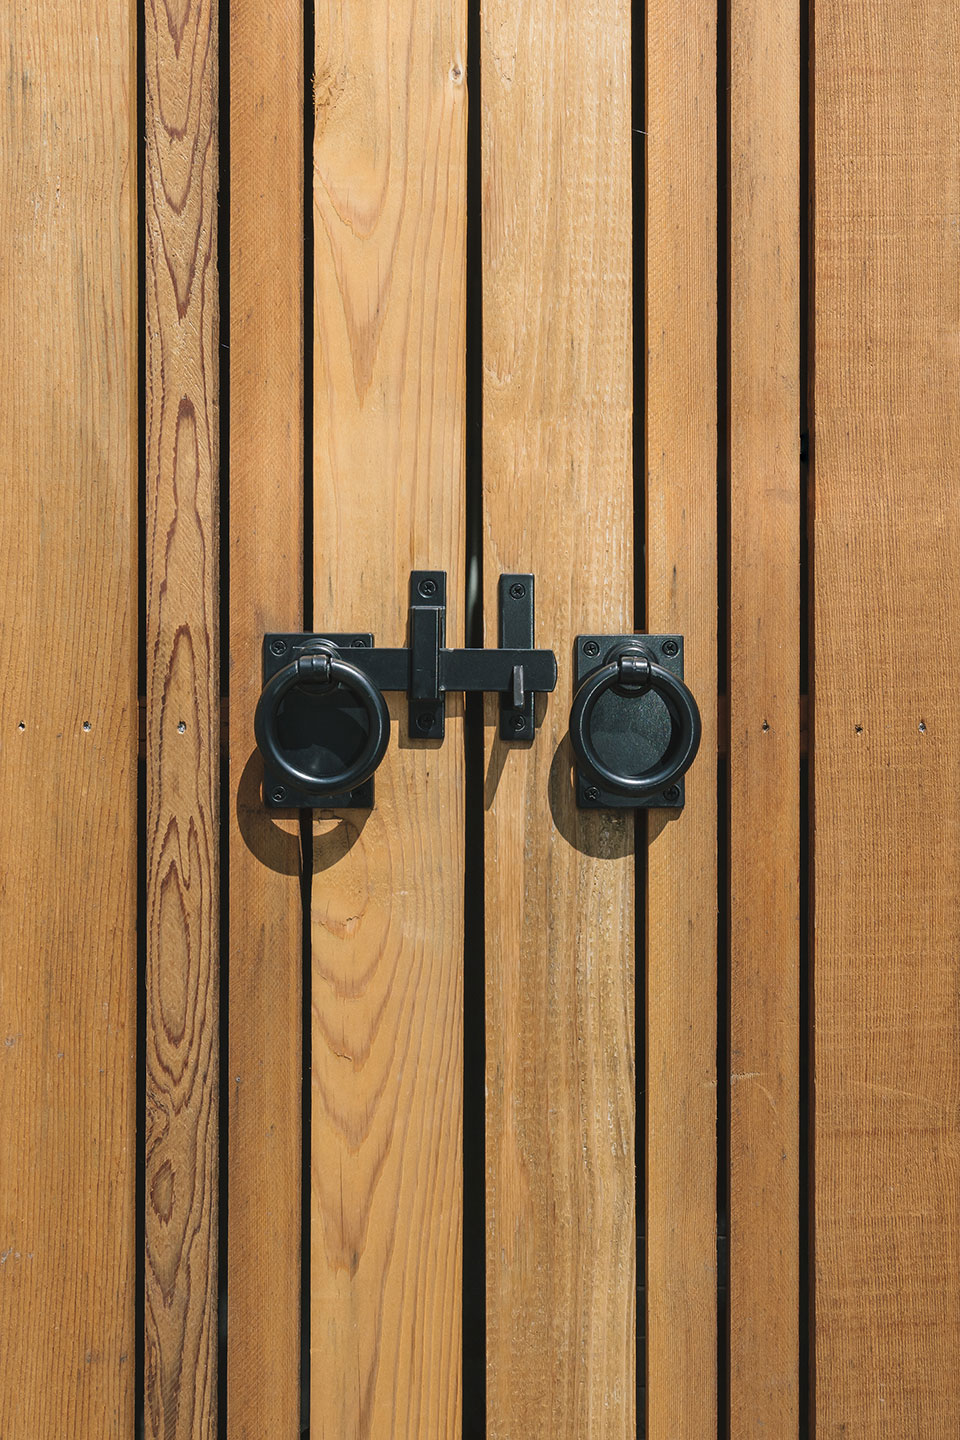 Black iron handles and a latch secure the cedar gates in front of the exterior trash enclosure at the Hillside House.